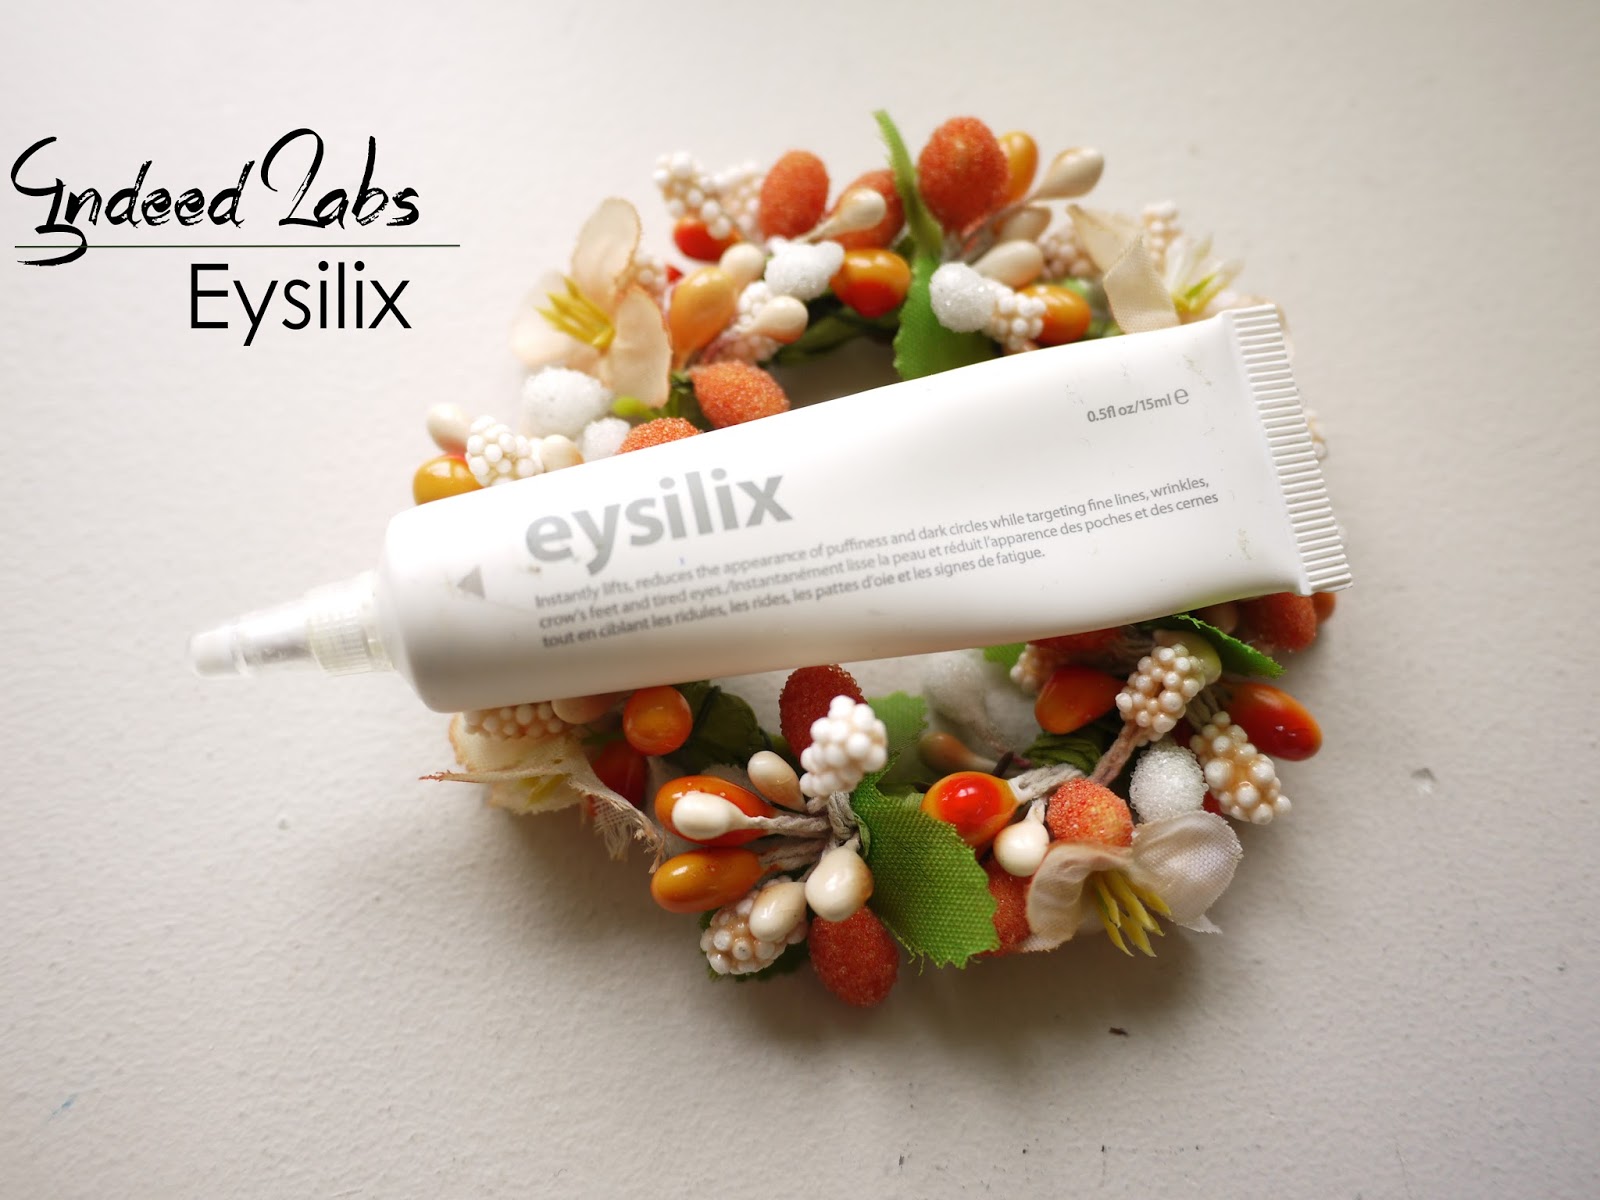 indeed labs eysilix eye cream review instant eye rescue